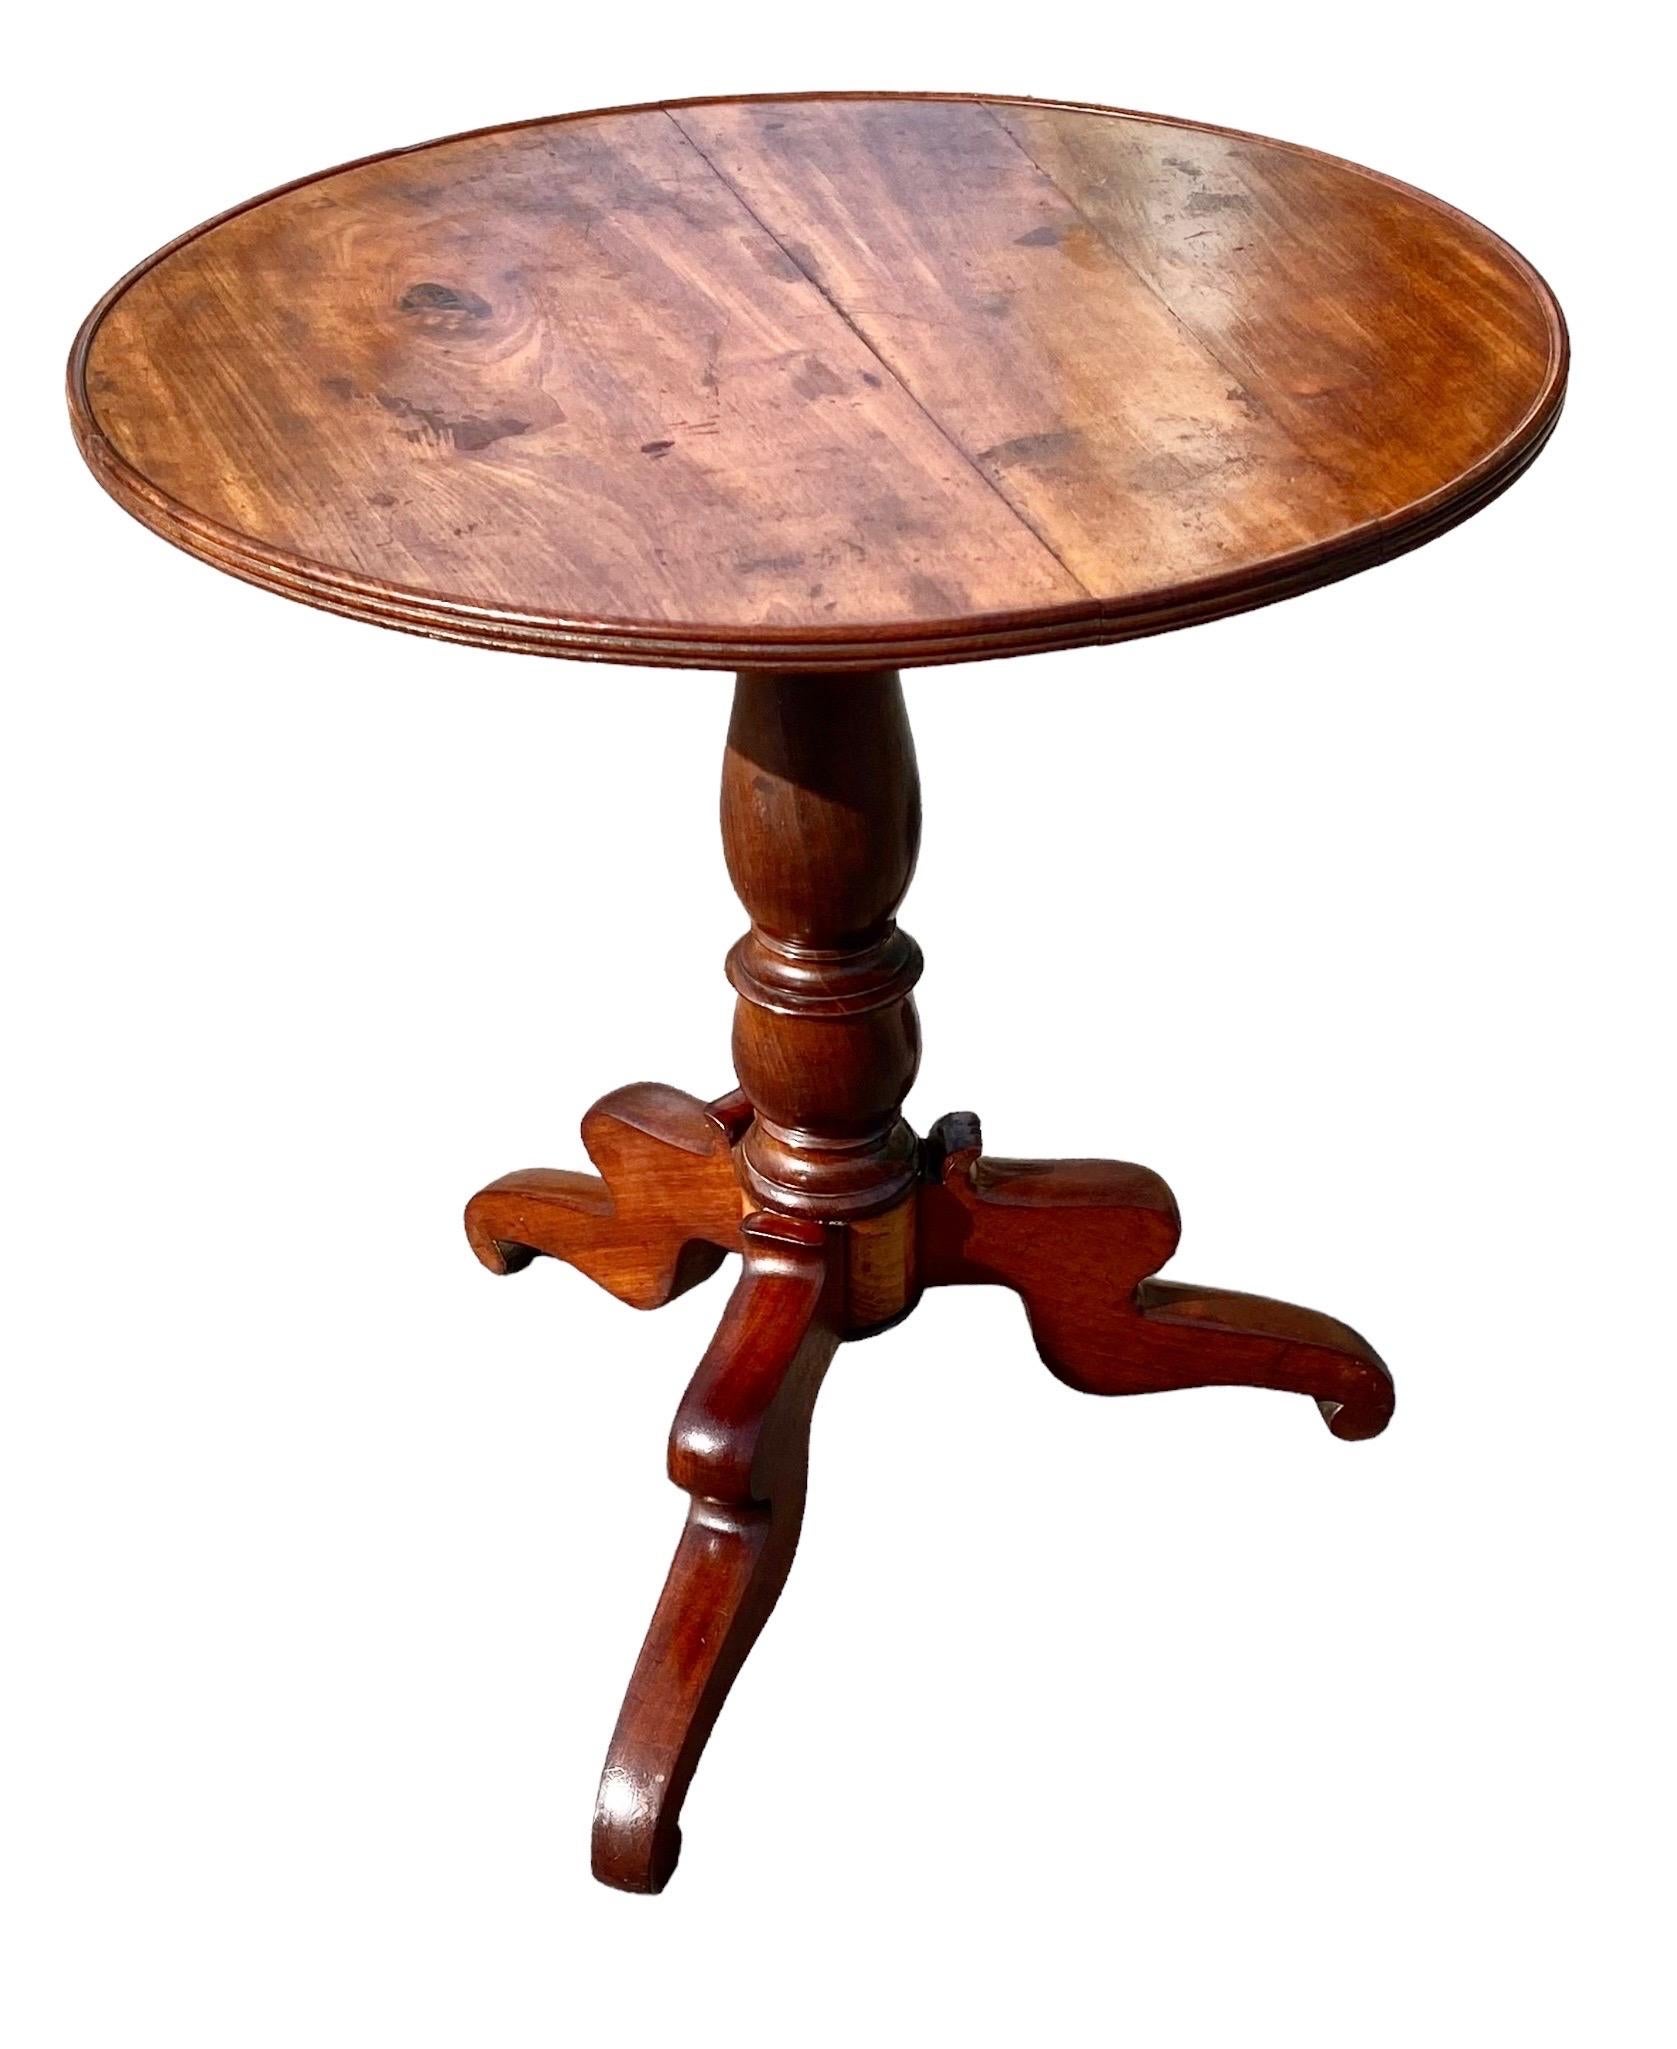 A period Louis Philippe solid old growth cherry wood revolving tilt top supper or accent table having a beautiful patina and knots in a two board top with a reeded edge. The hand turned tripod base with beautifully shaped legs. Circa 1860

It is a